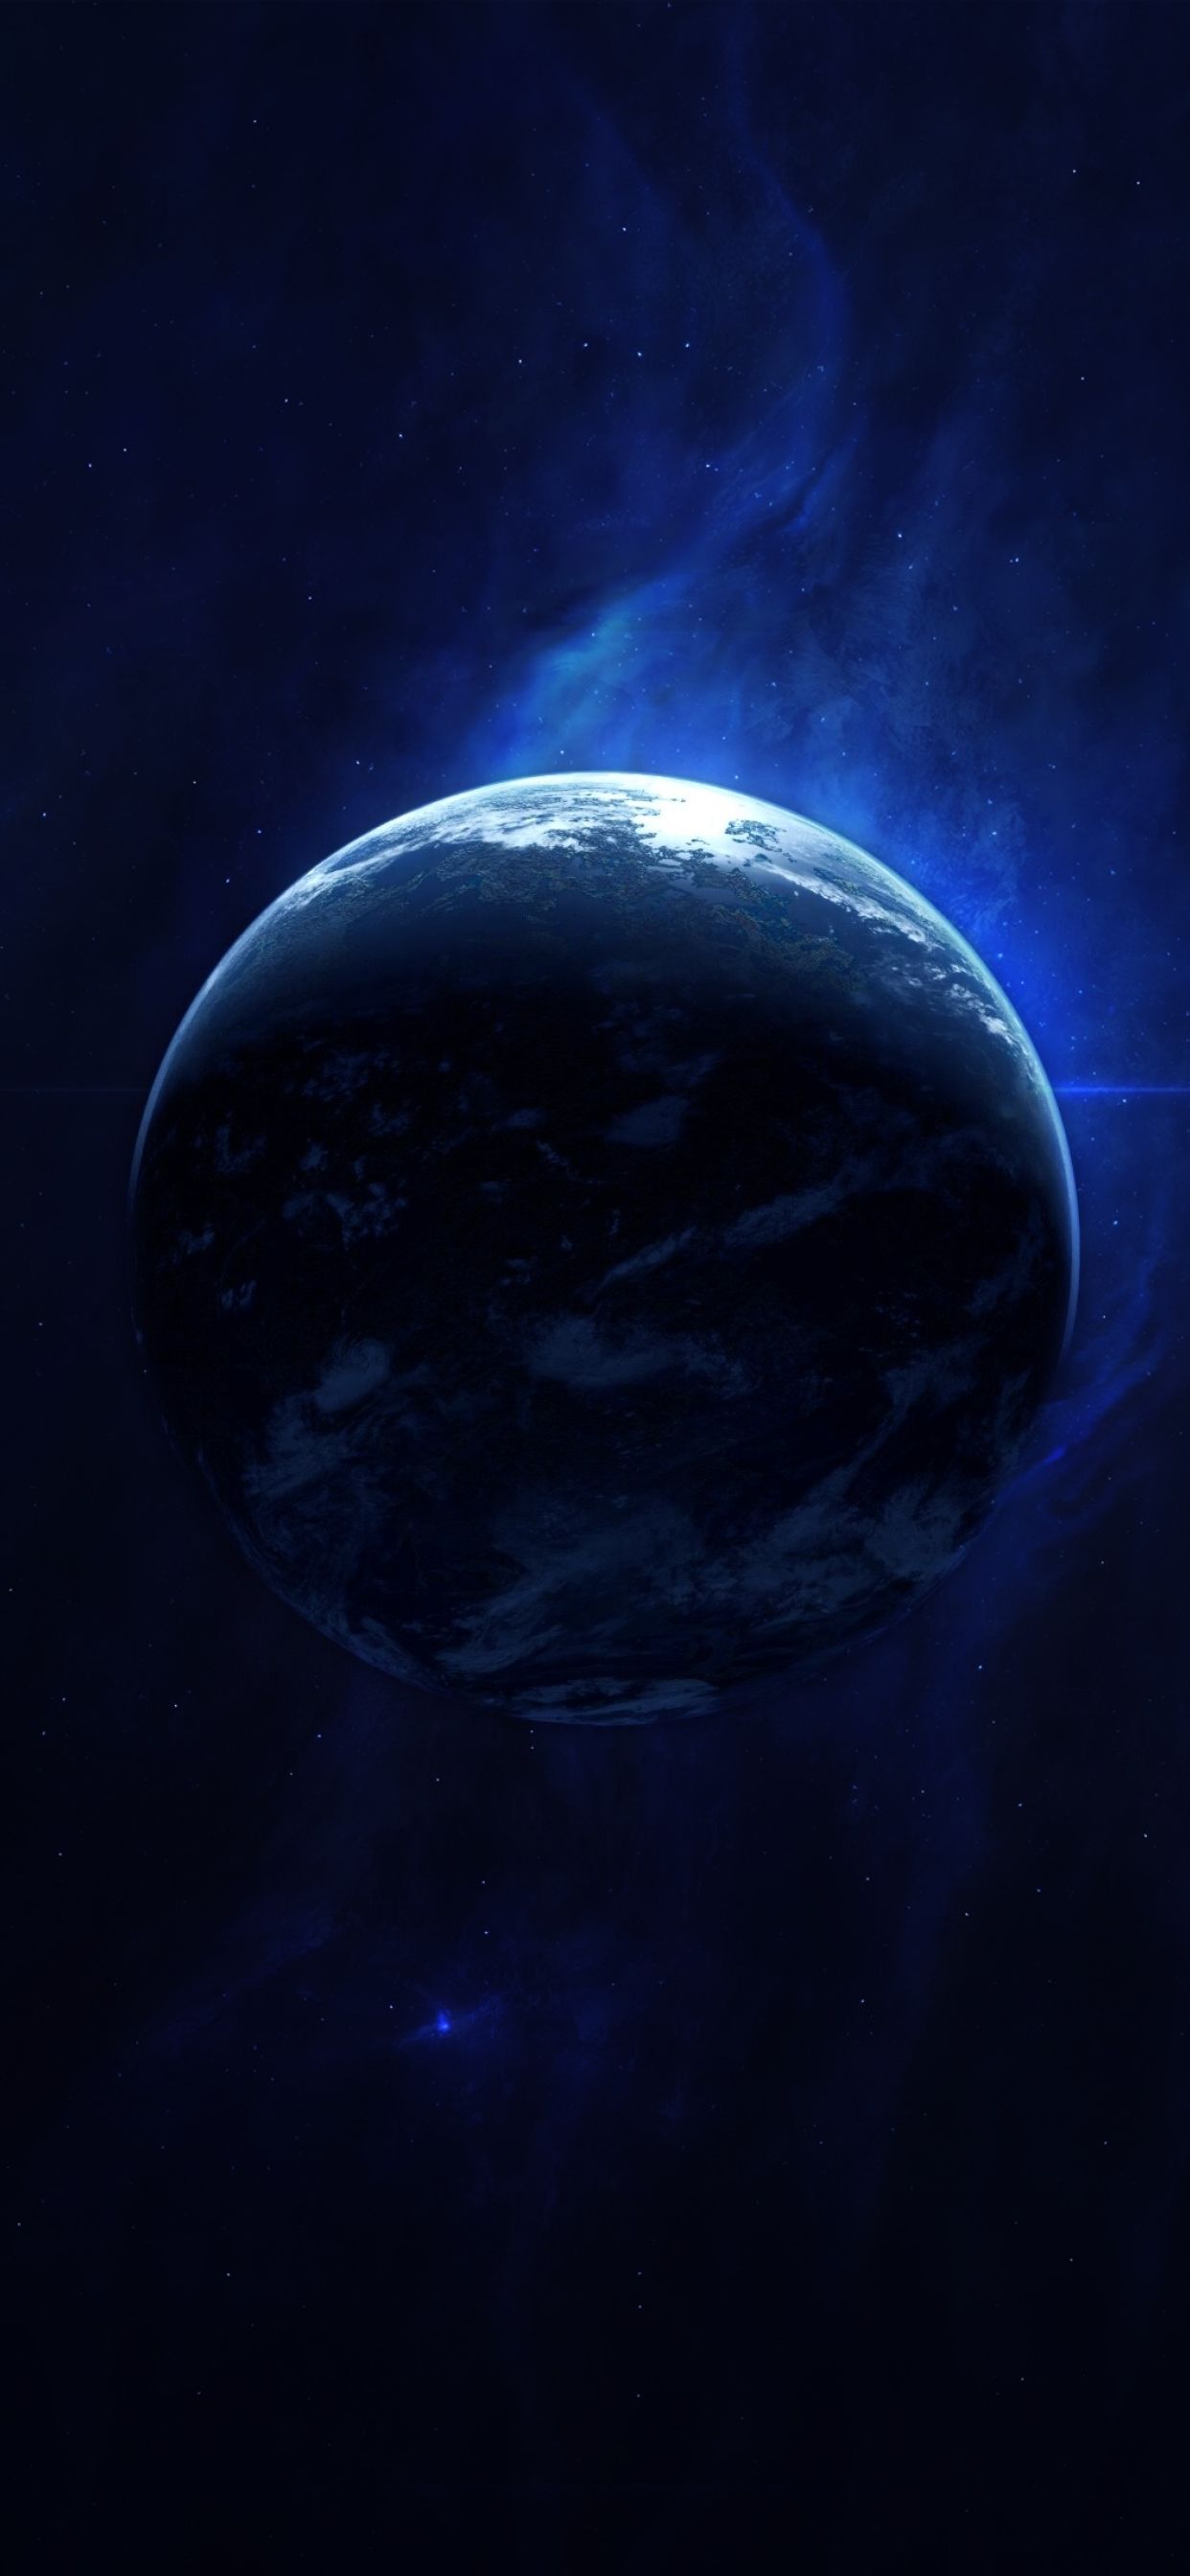 Planet In Space 4K iPhone XS MAX Wallpaper, HD Space 4K Wallpaper, Image, Photo and Background